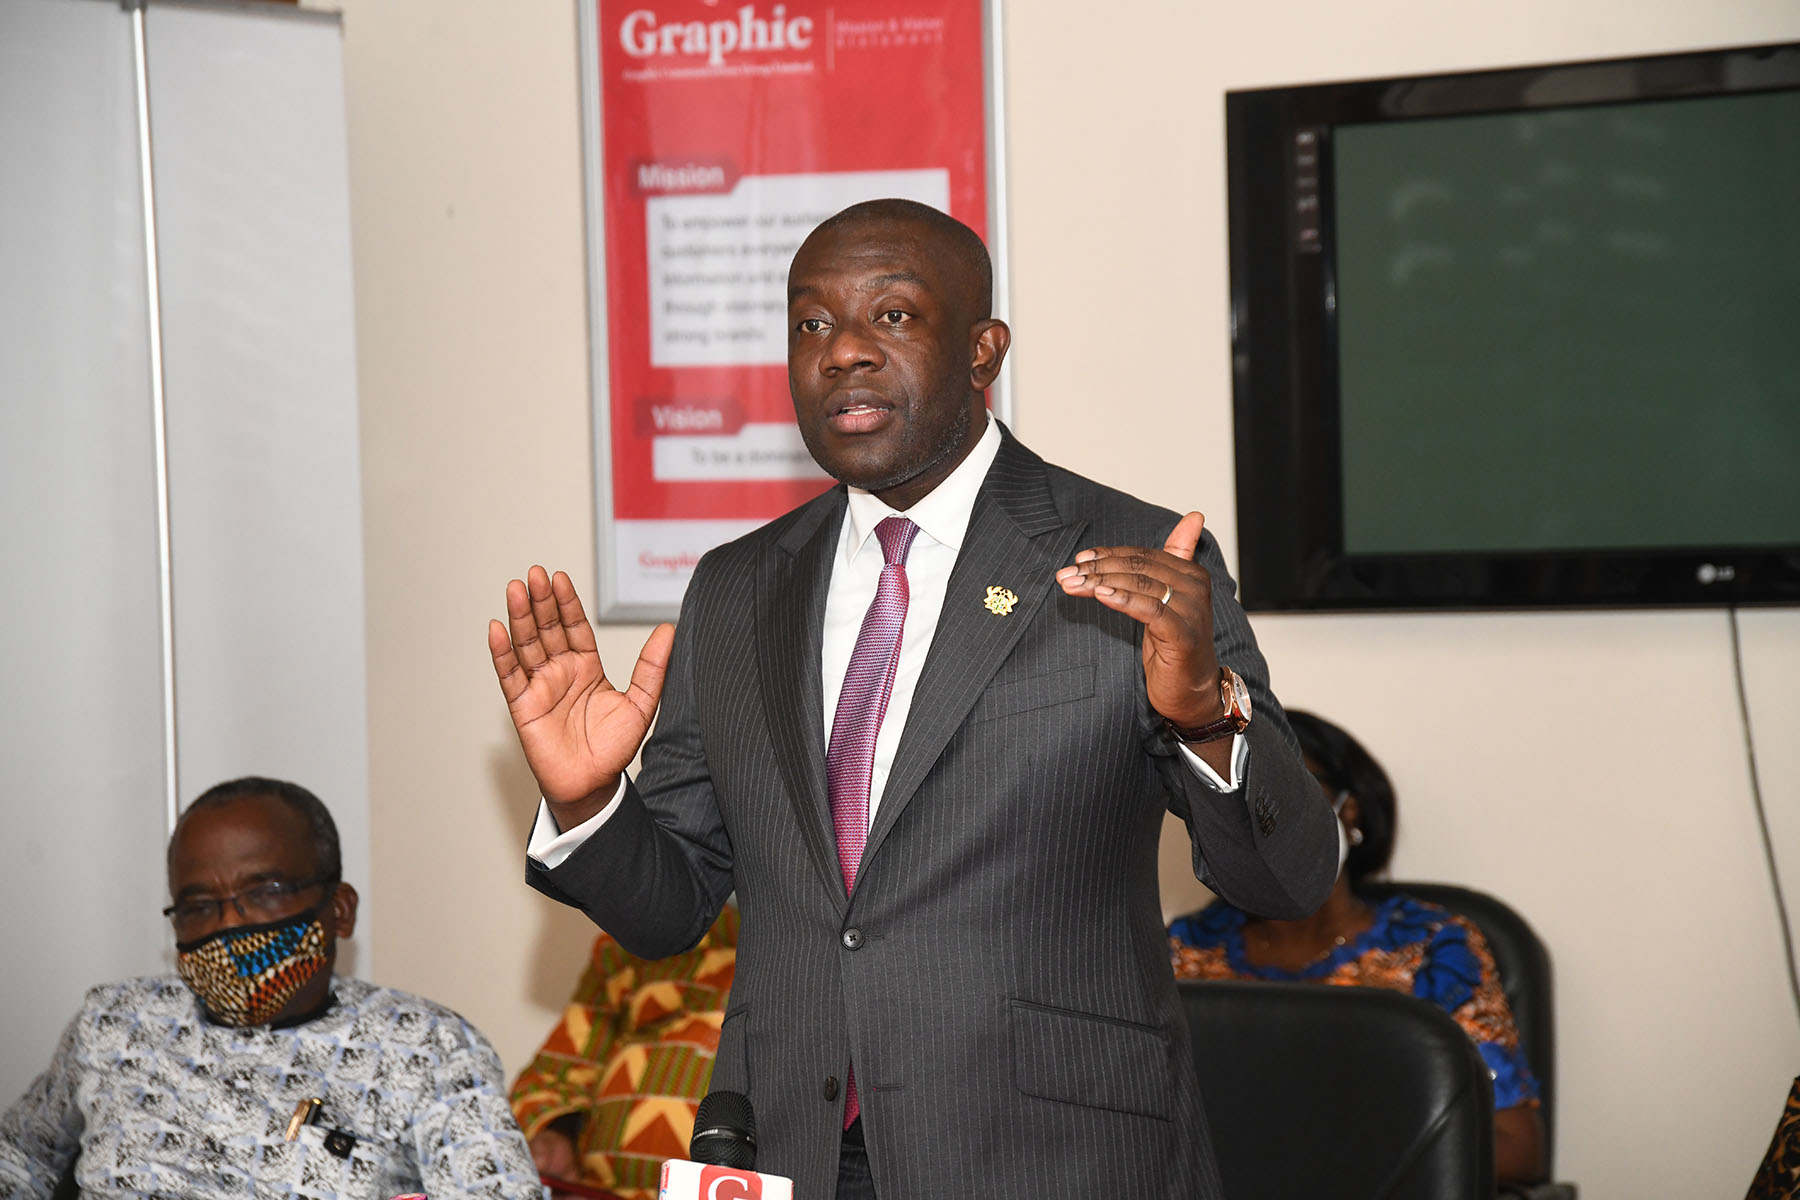 Pursue an aggressive digital transformation - Minister charges Graphic